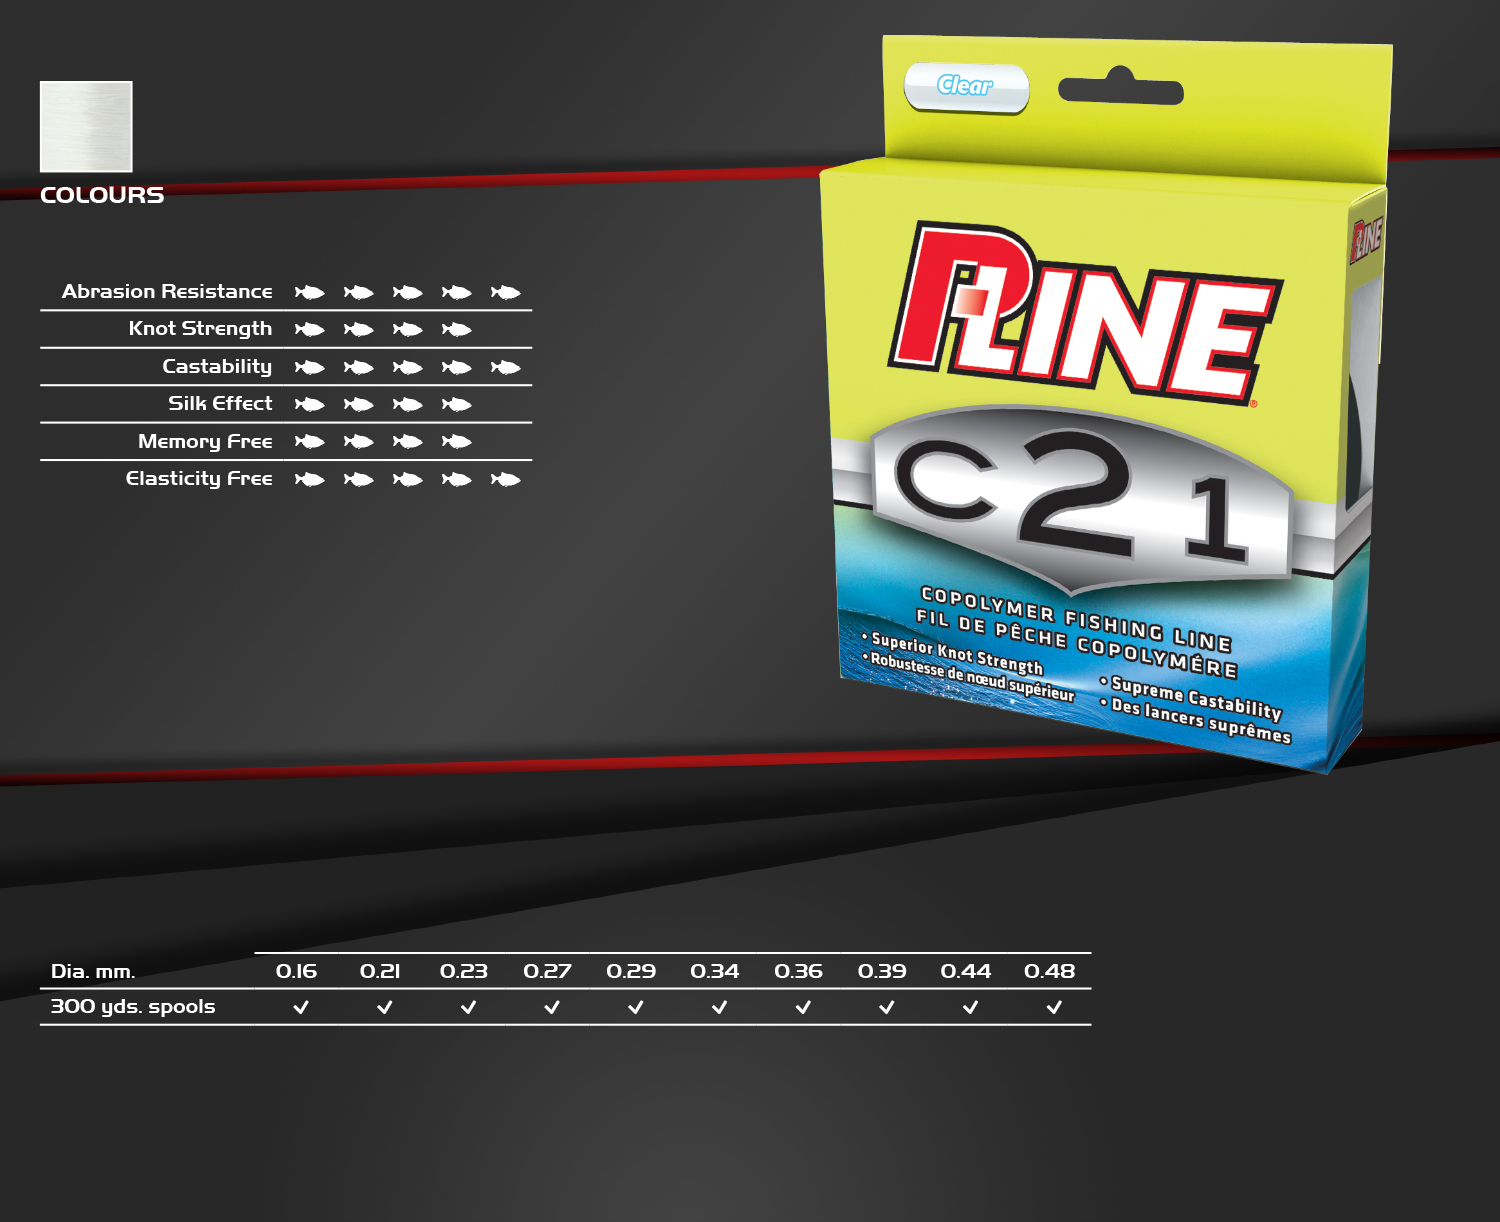 Bomgaars : P-Line C21 Copolymer Fishing Line, Clear : Fishing Lines